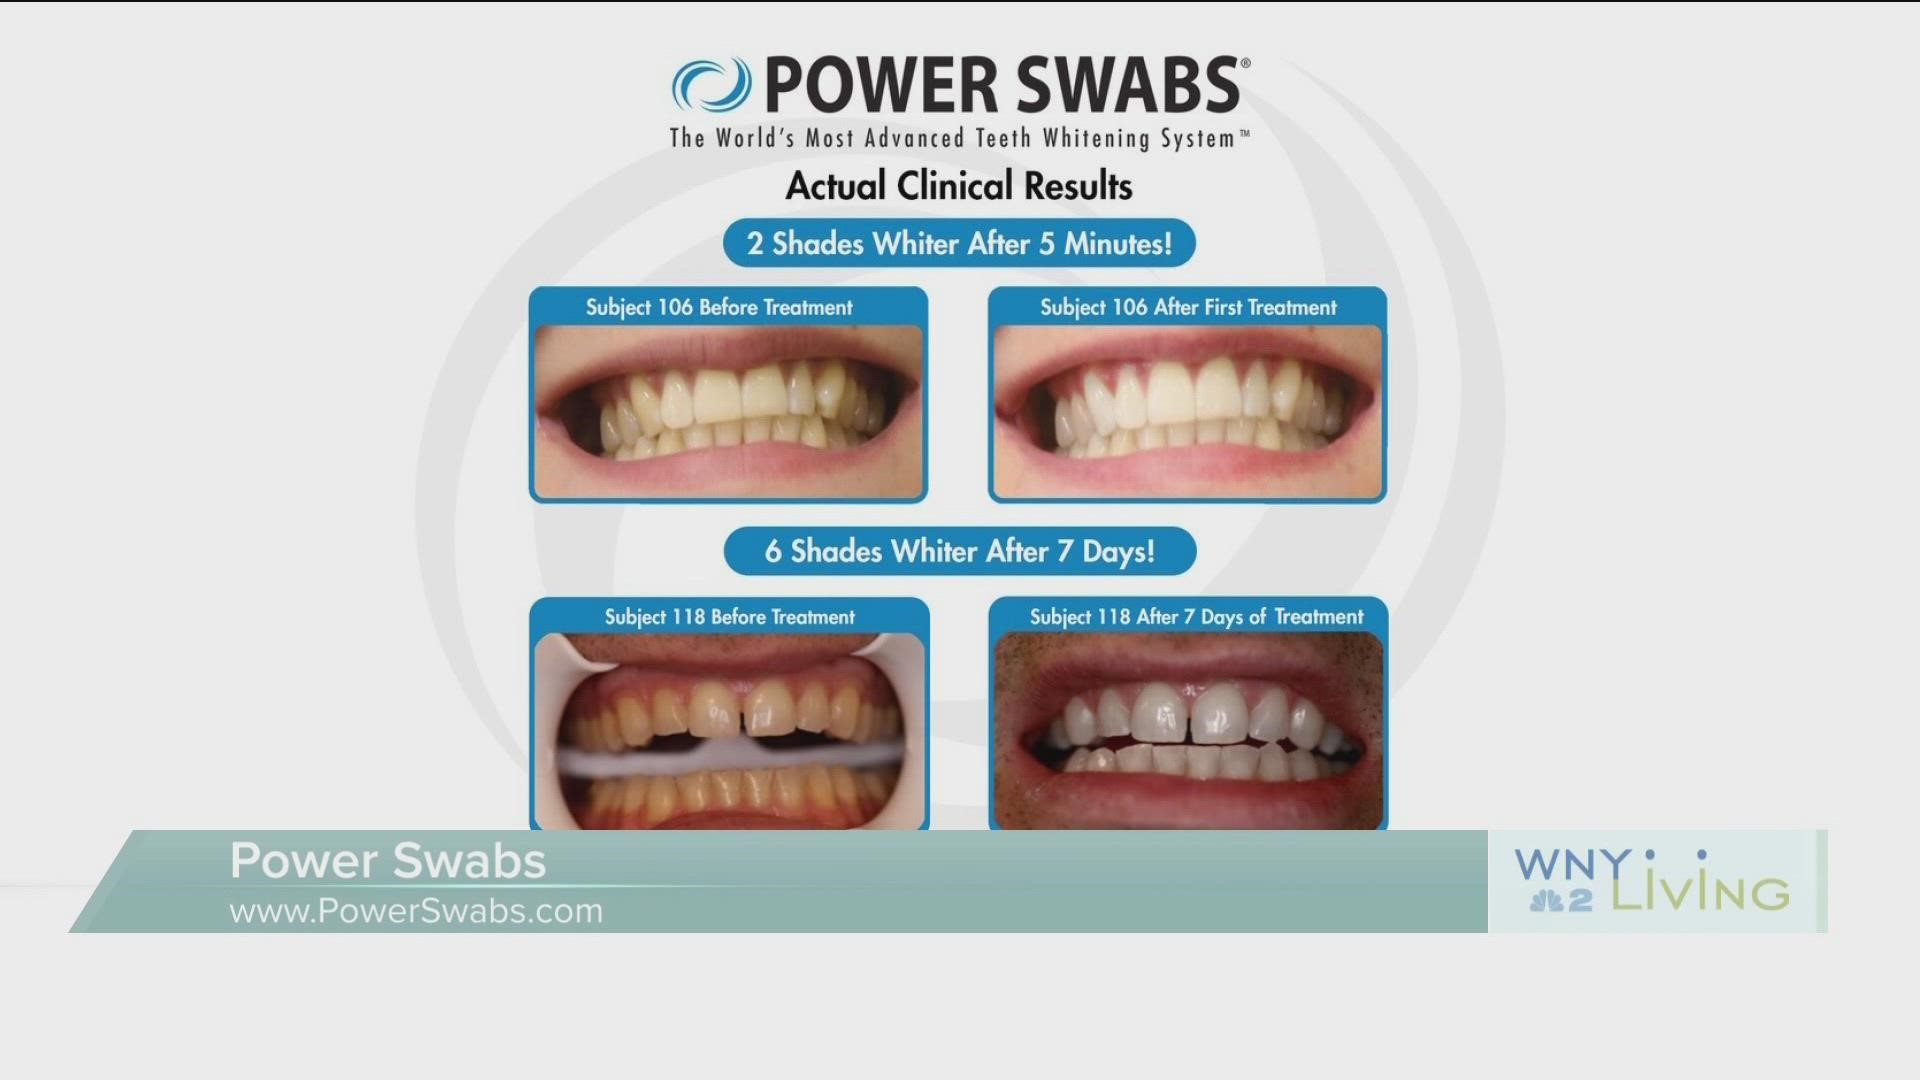 WNY Living - January 7 - Power Swabs Teeth Whitening (THIS VIDEO IS SPONSORED BY POWER SWABS)